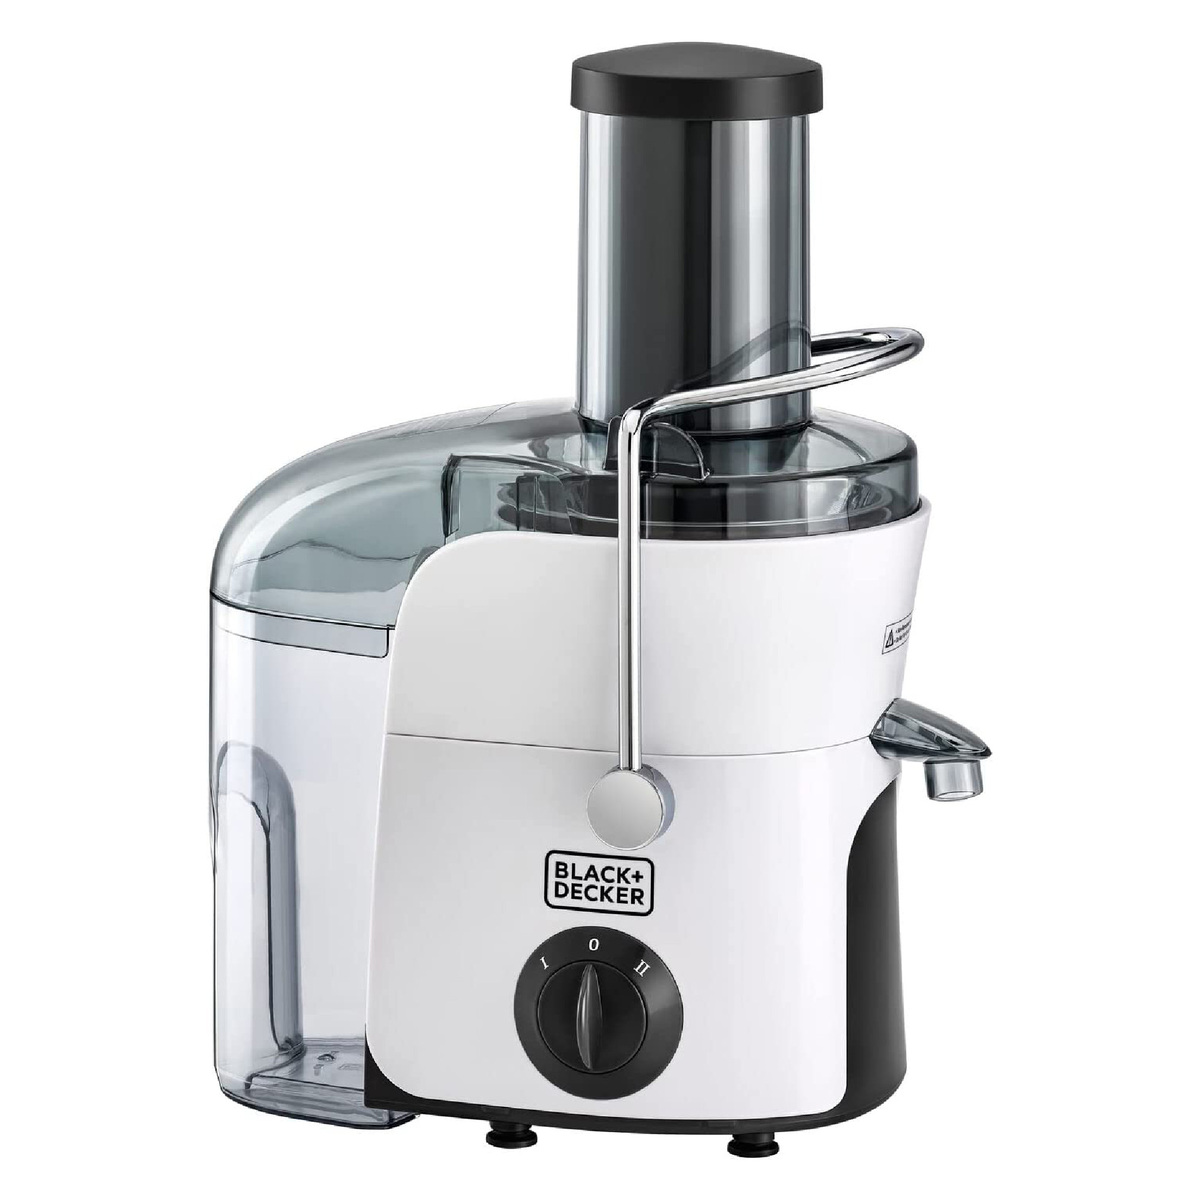 Black+Decker 800 W Juicer With 1.5L Large Pulp Container, White, JE780-B5  Online at Best Price, Juicers